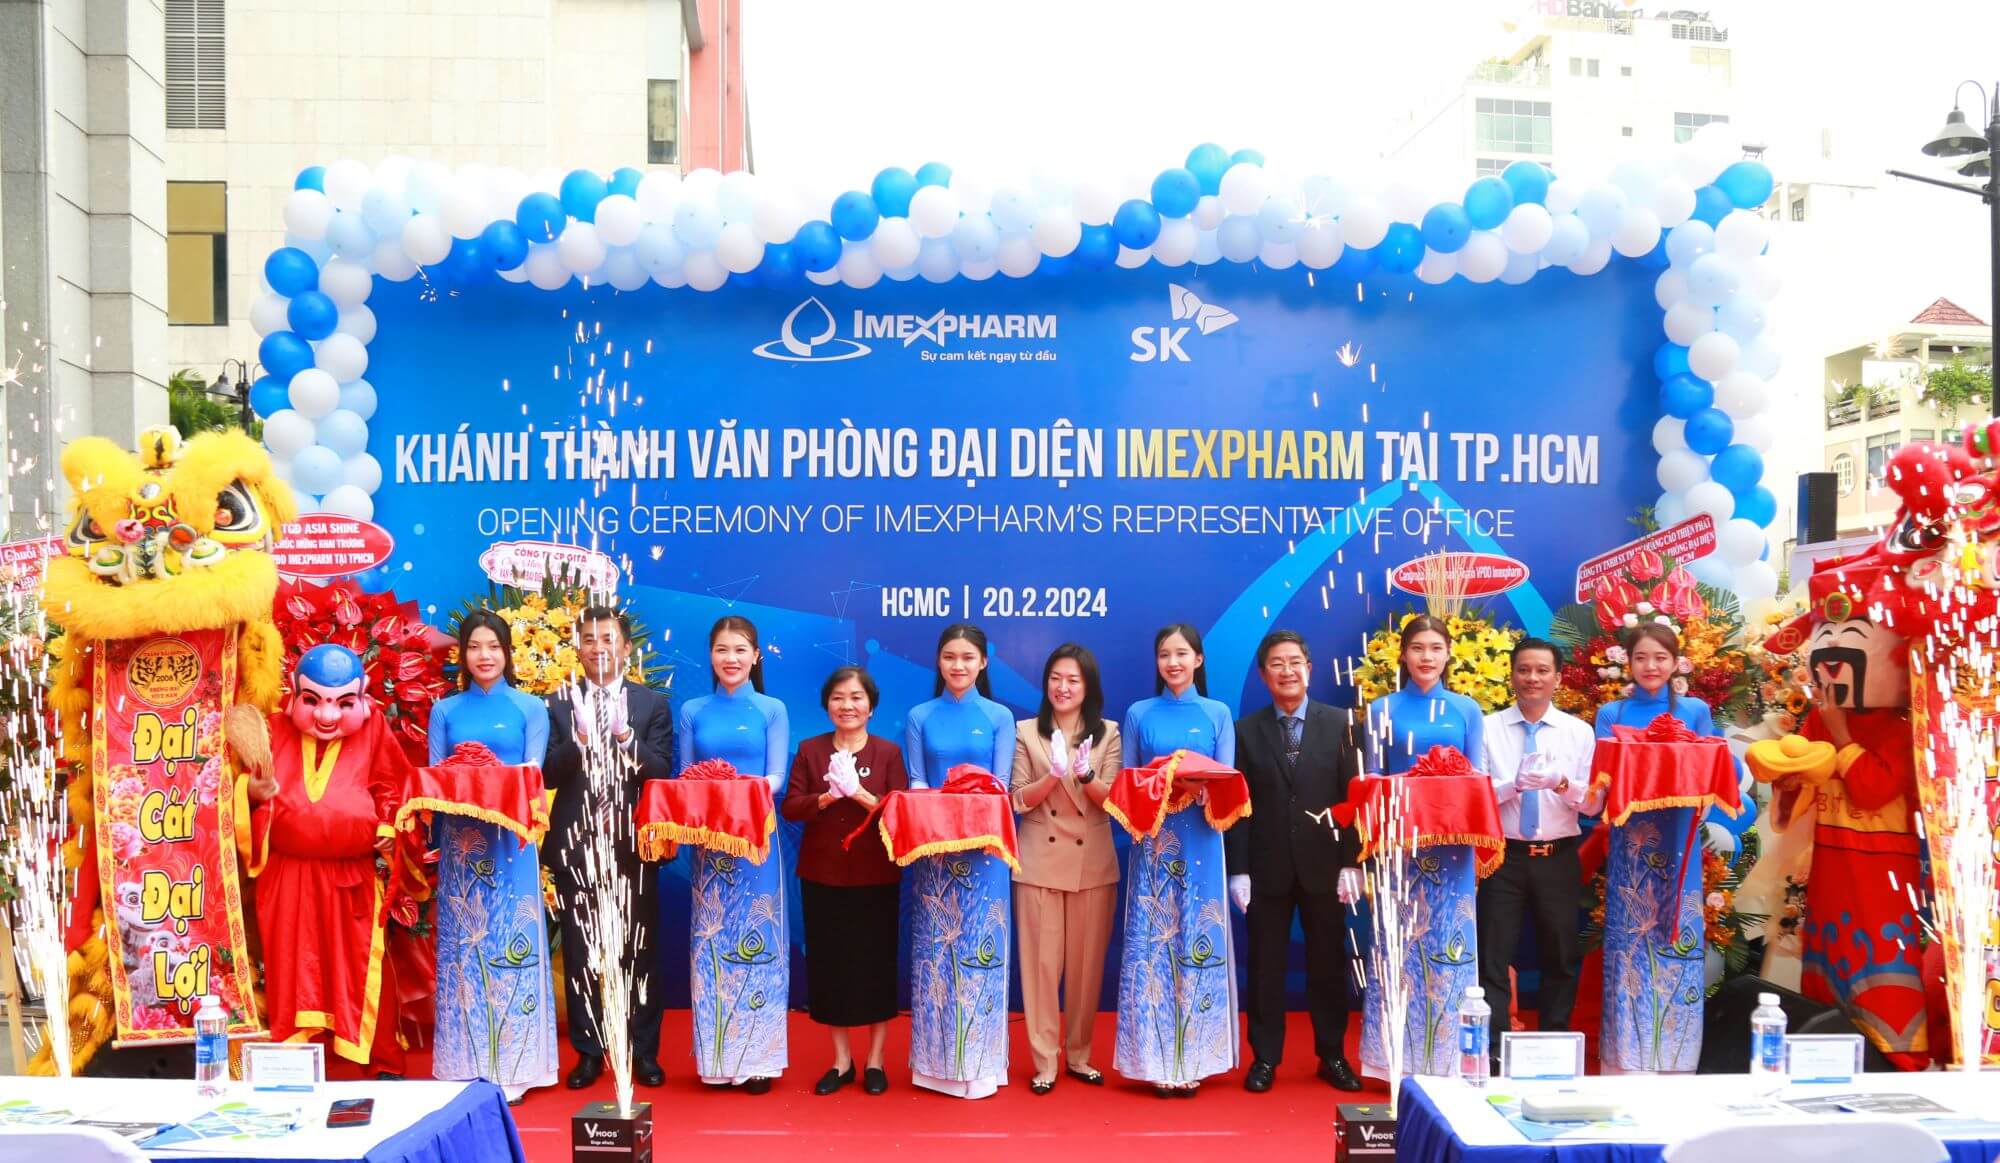 Imexpharm inaugurated a representative office in Ho Chi Minh City, increasing brand presence and serving customers, partners and investors better.